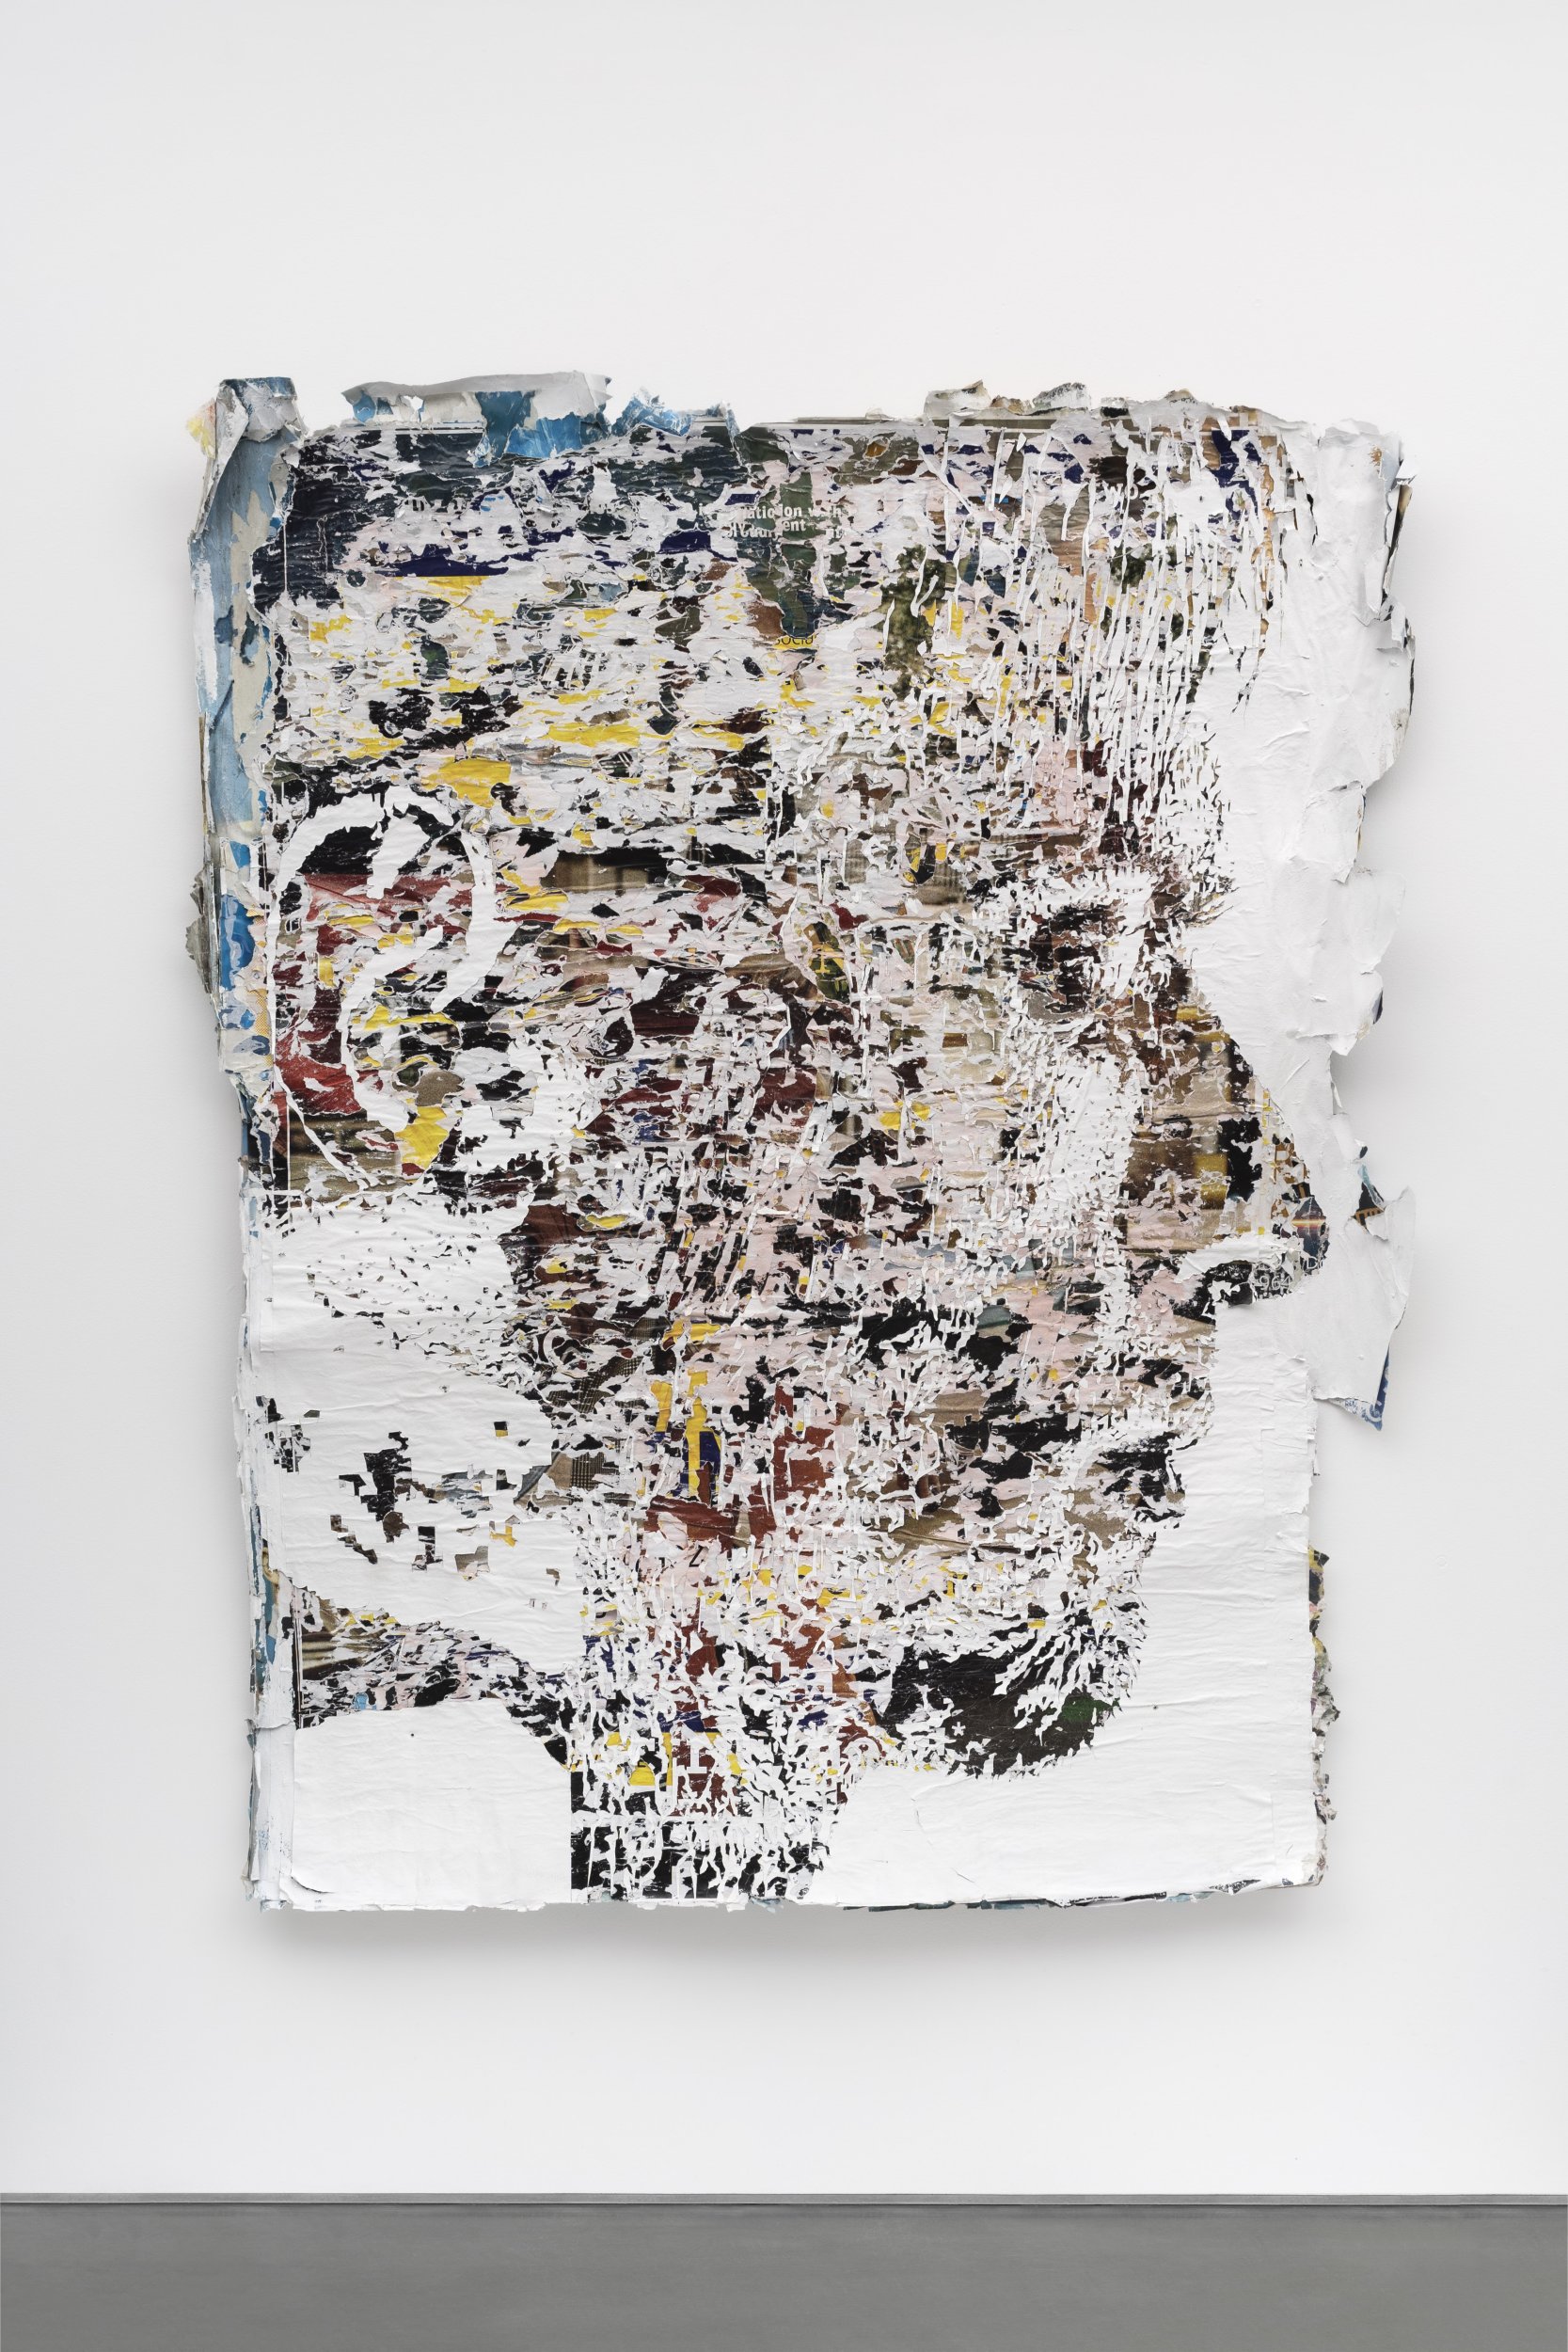 Alexandre Farto aka Vhils, Scrape Series #09, 2022. Hand-carved advertising posters. 184 x 146 cm. Unique
